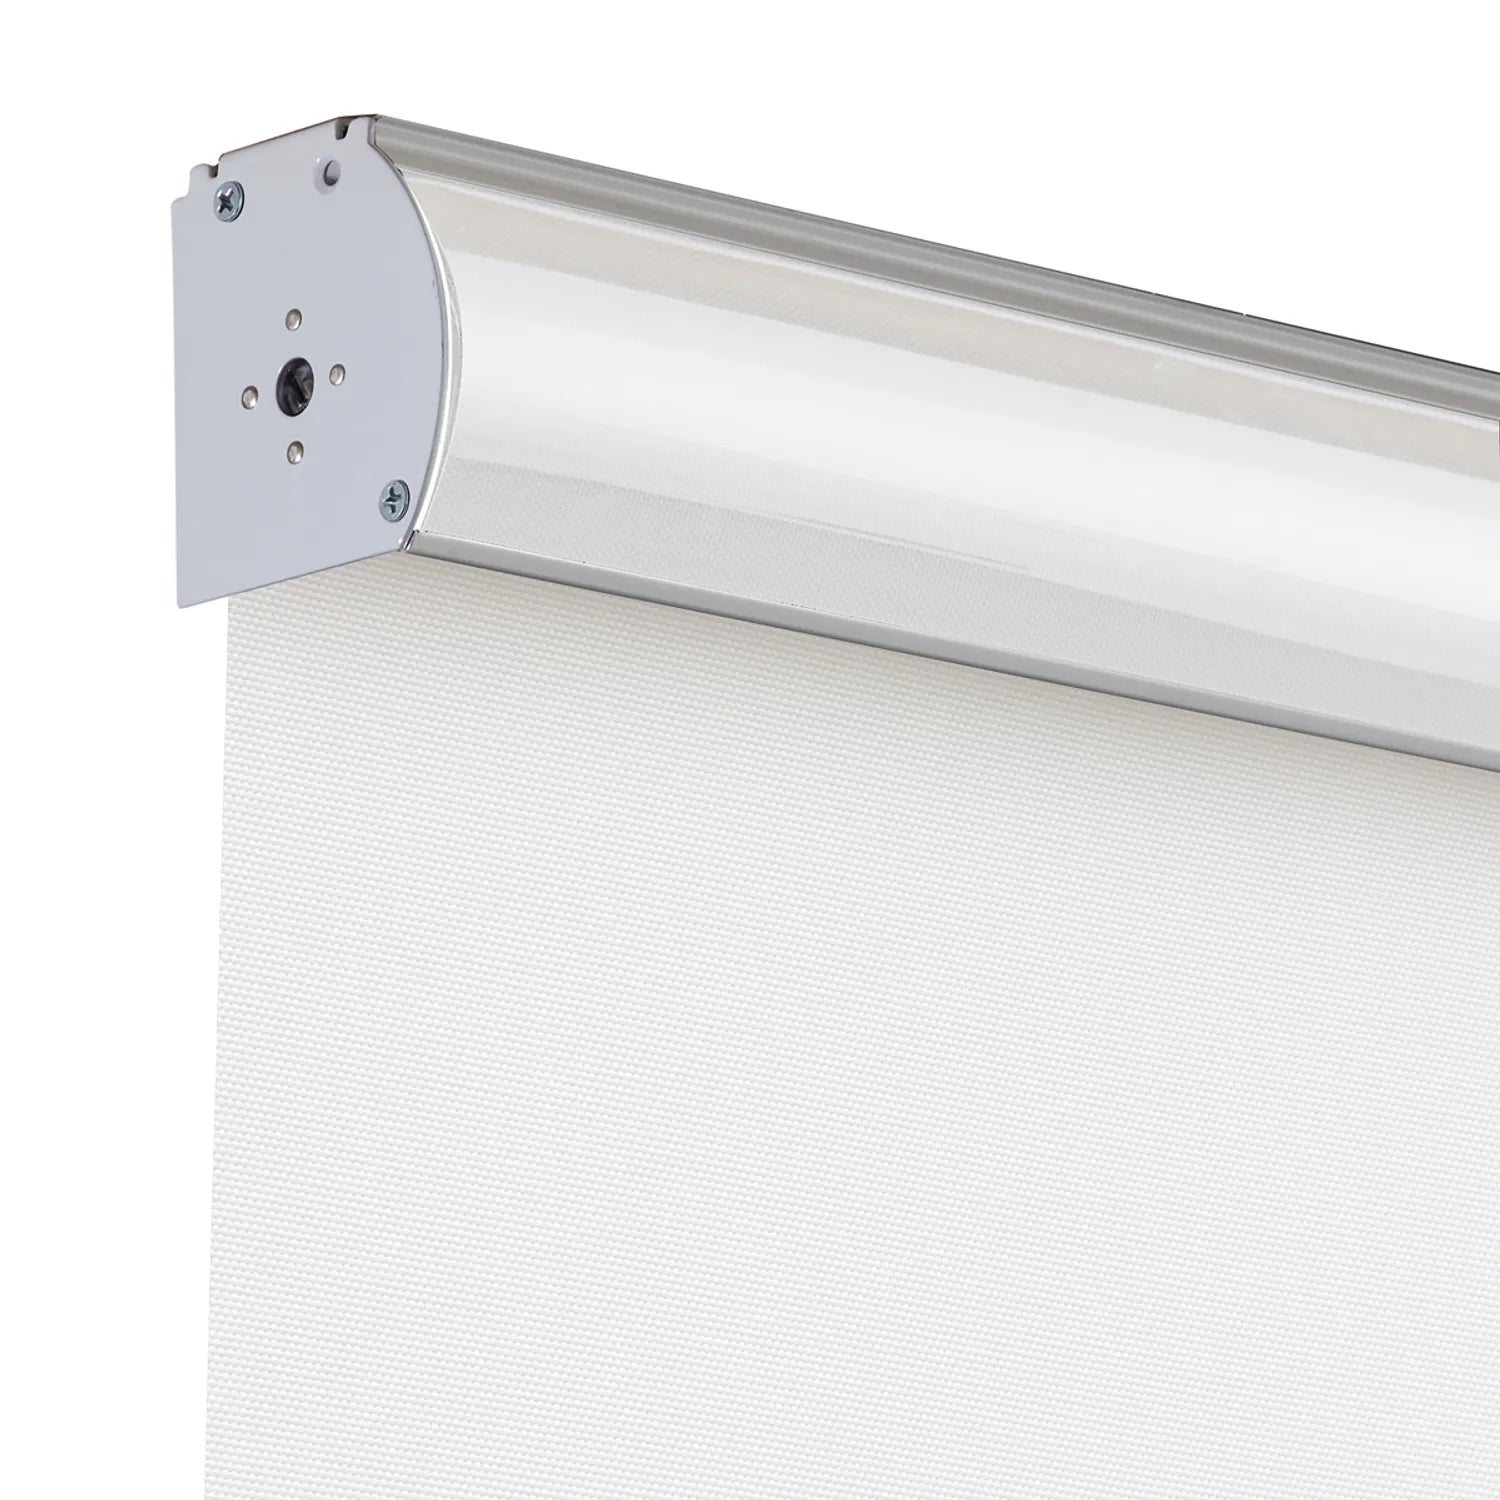 Close-up of EaseEase UV Blocker Roller Blind showing robust roller tube and cordless bracket design for safe and easy installation